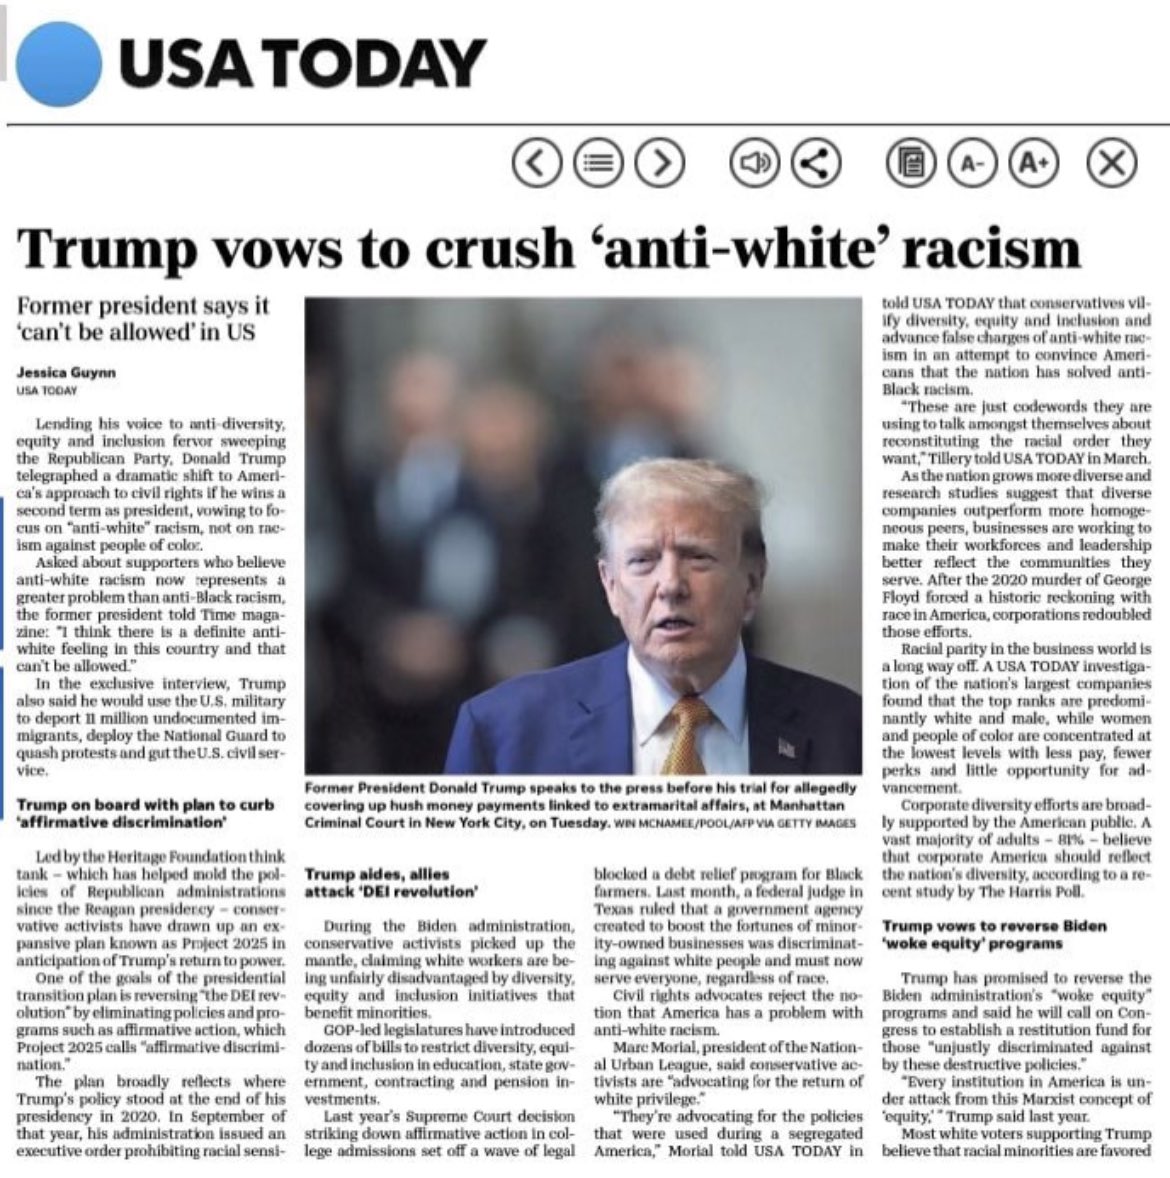 🔥Trump vows to crush ‘anti-white’ racism; saying it ‘can’t be allowed’ in the U.S. I’ll be glad if I never hear that word again. Obama started it and continues to escalate racial tensions through the Biden administration. It is nothing but a tool used to divide Americans and…